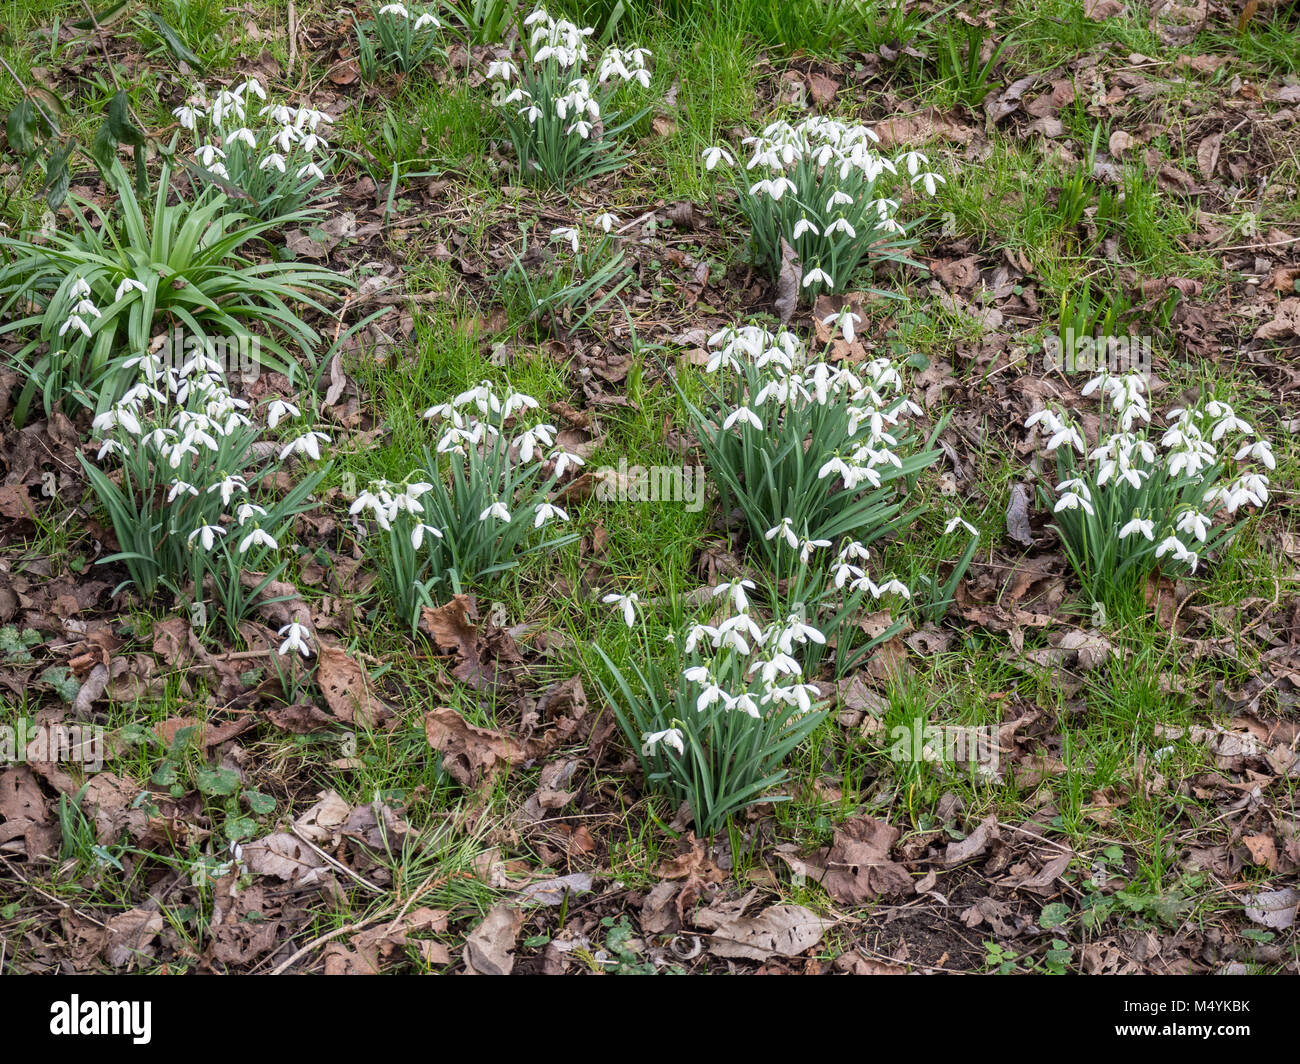 Clumps of snowdrops growing amongst fallen tree leaves Stock Photo